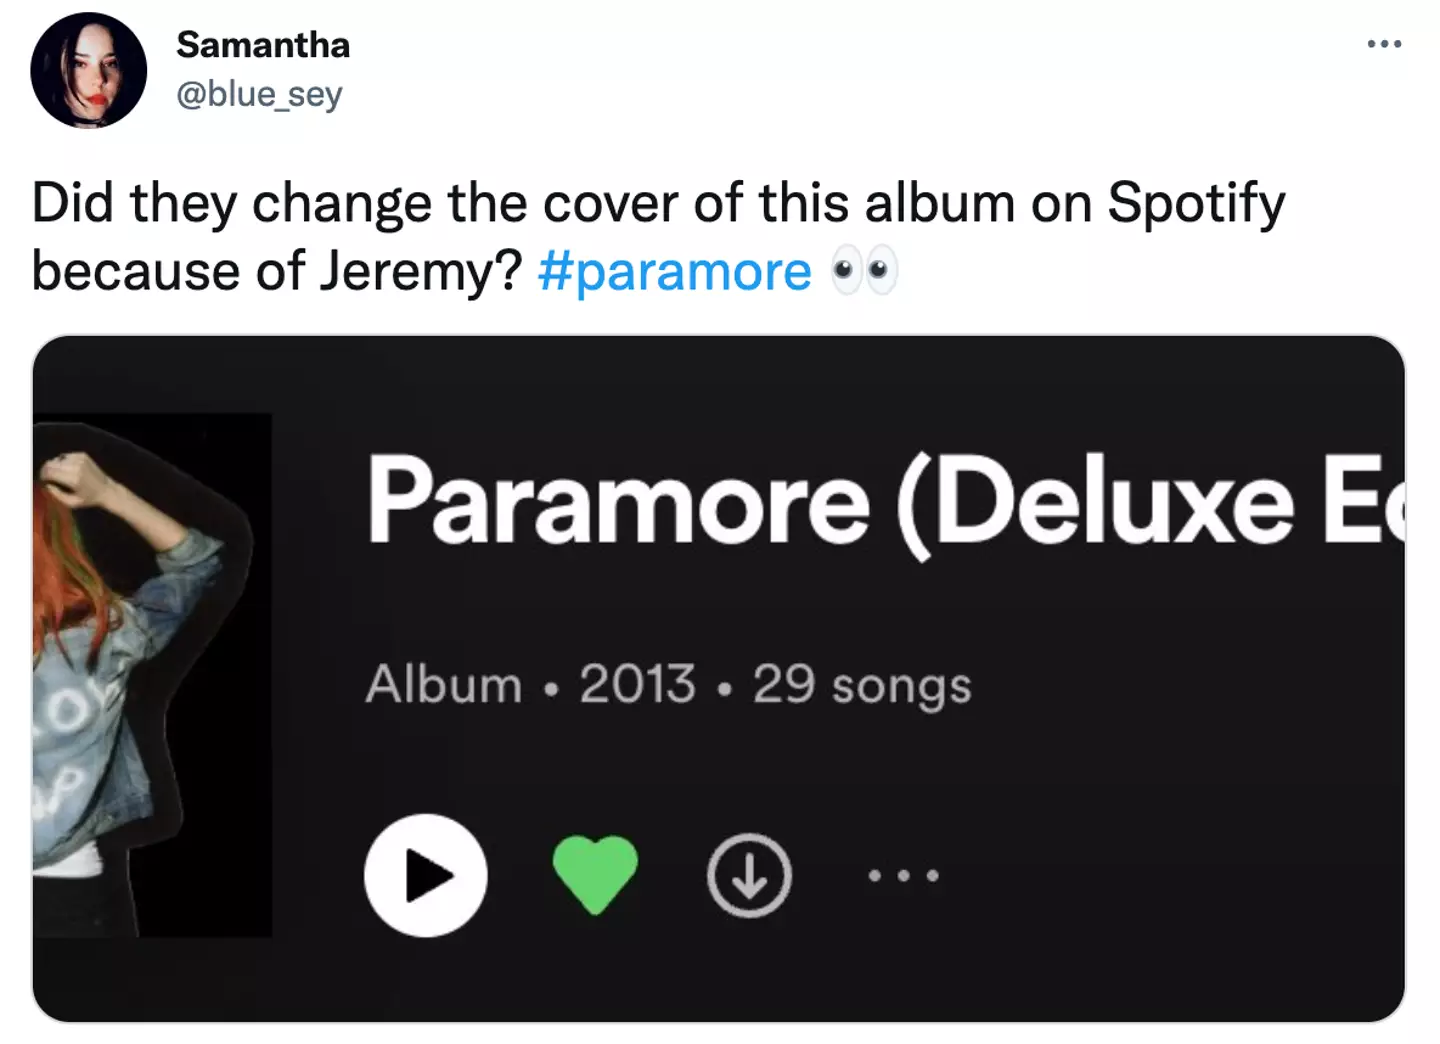 Paramore have changed the artwork of their 2013 self-titled album